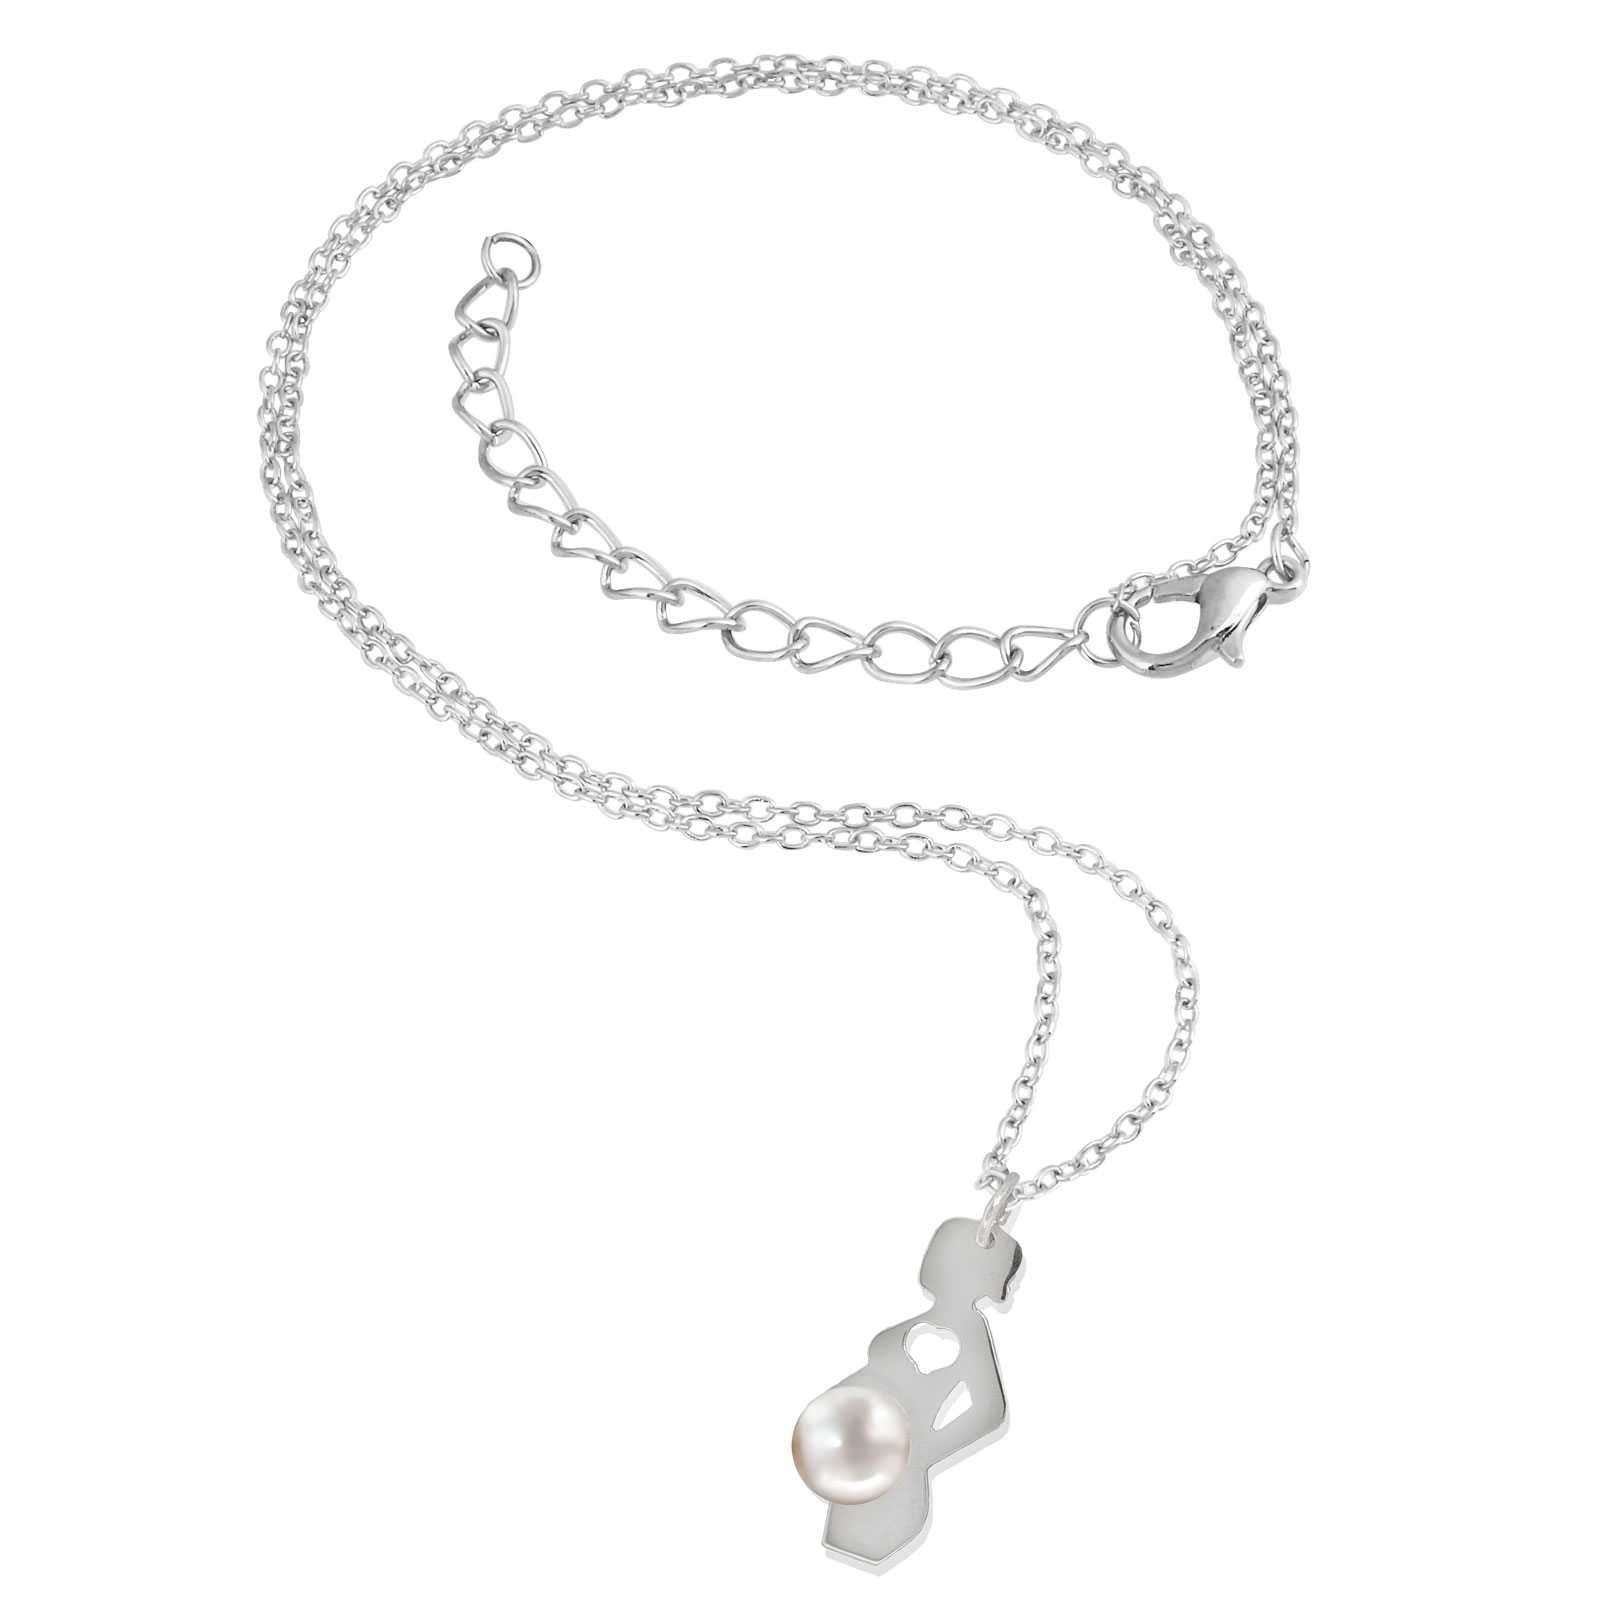 Mothe's love silve necklce - Mali's Canadian handmade jewelry 4 equal payments with Klarna
-------------------------------------